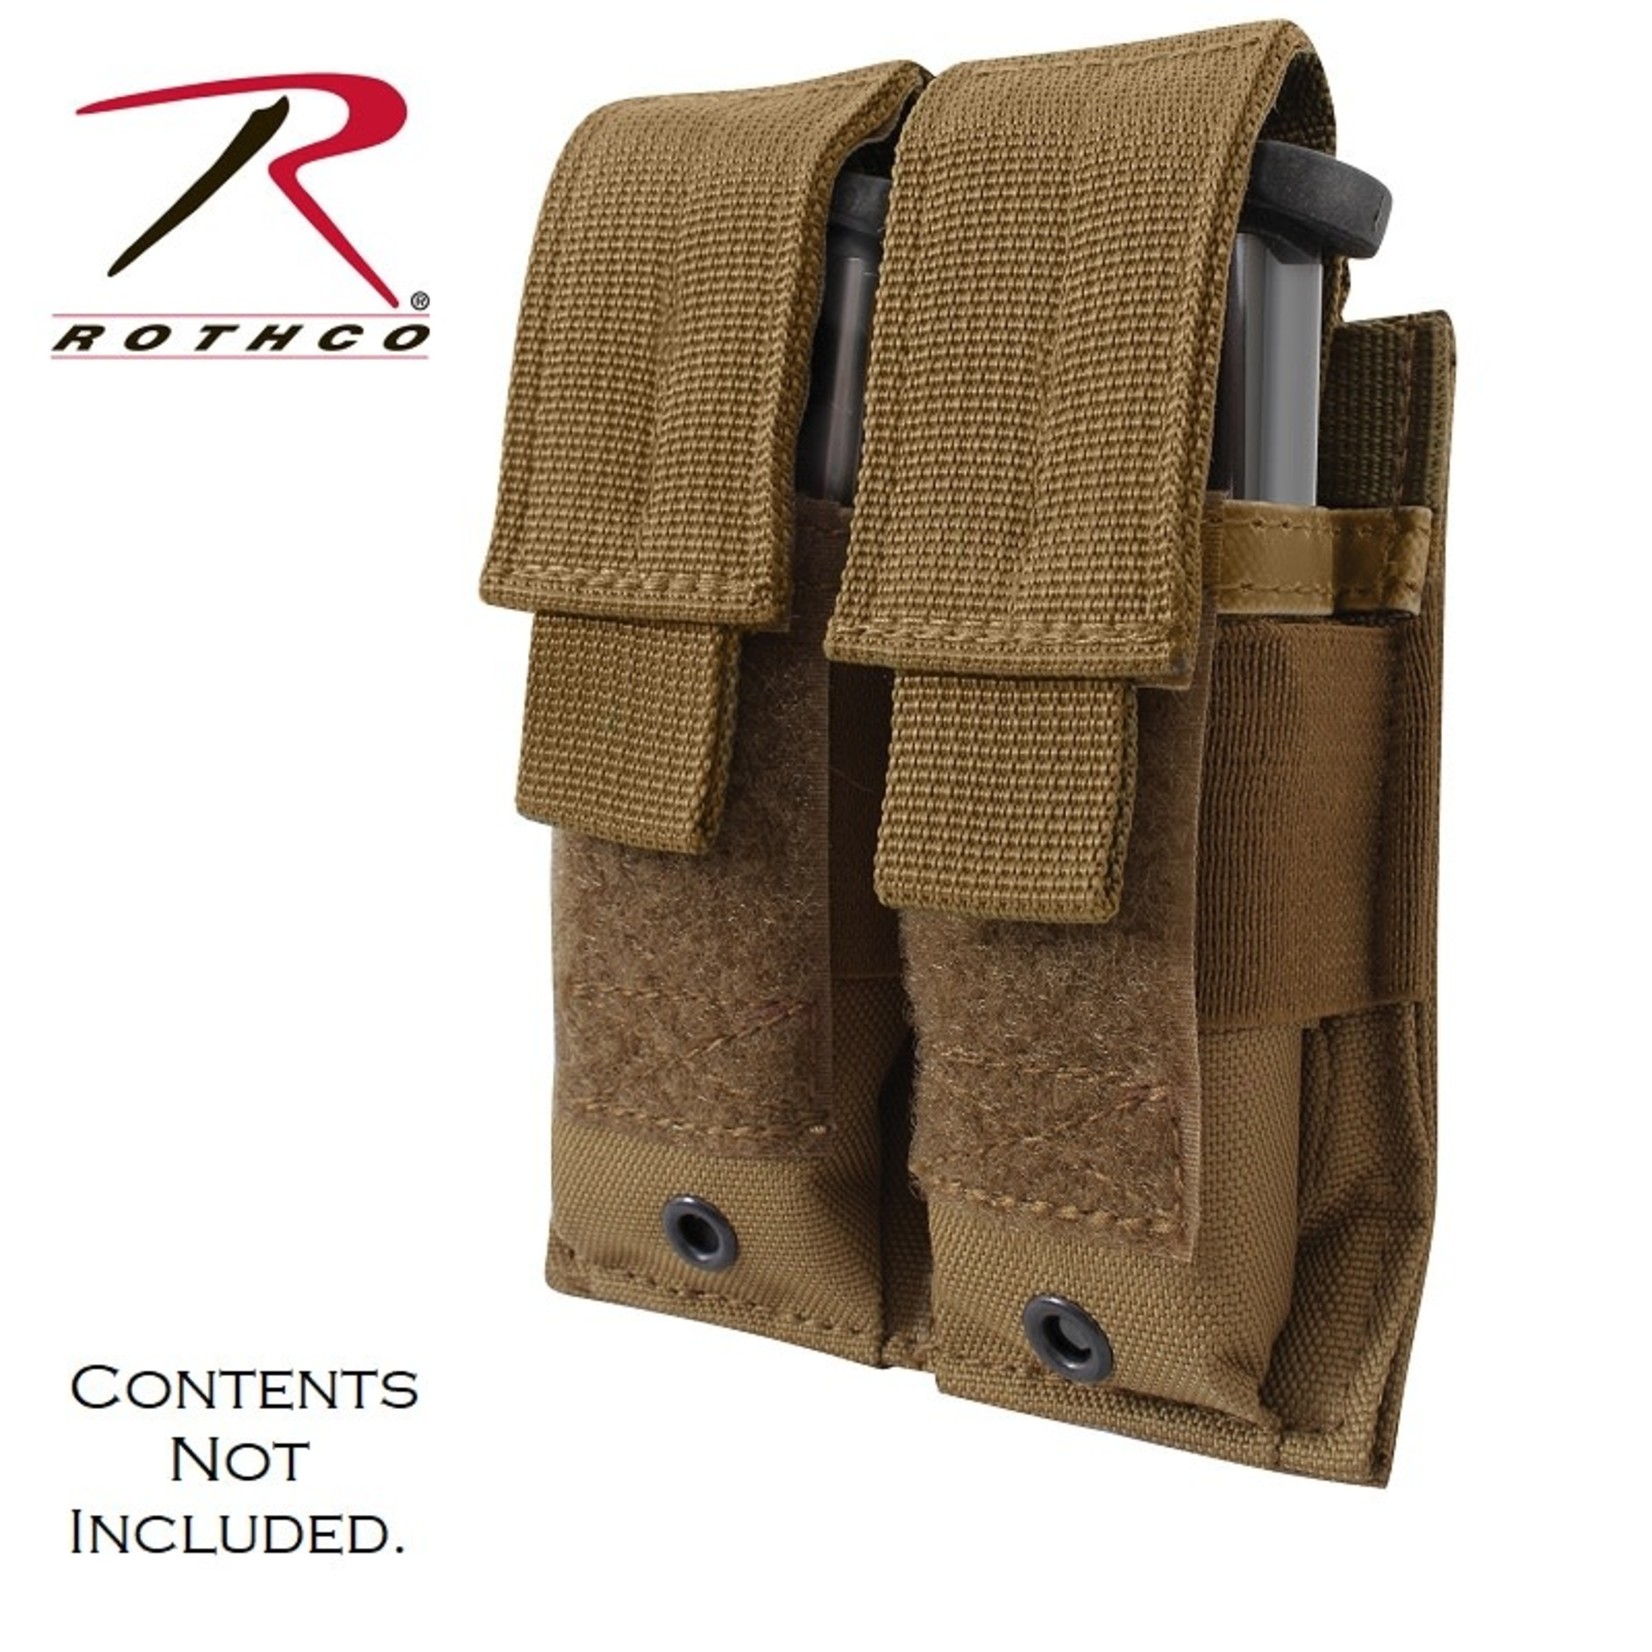 Rothco Rothco MOLLE Double Pistol Mag Pouch